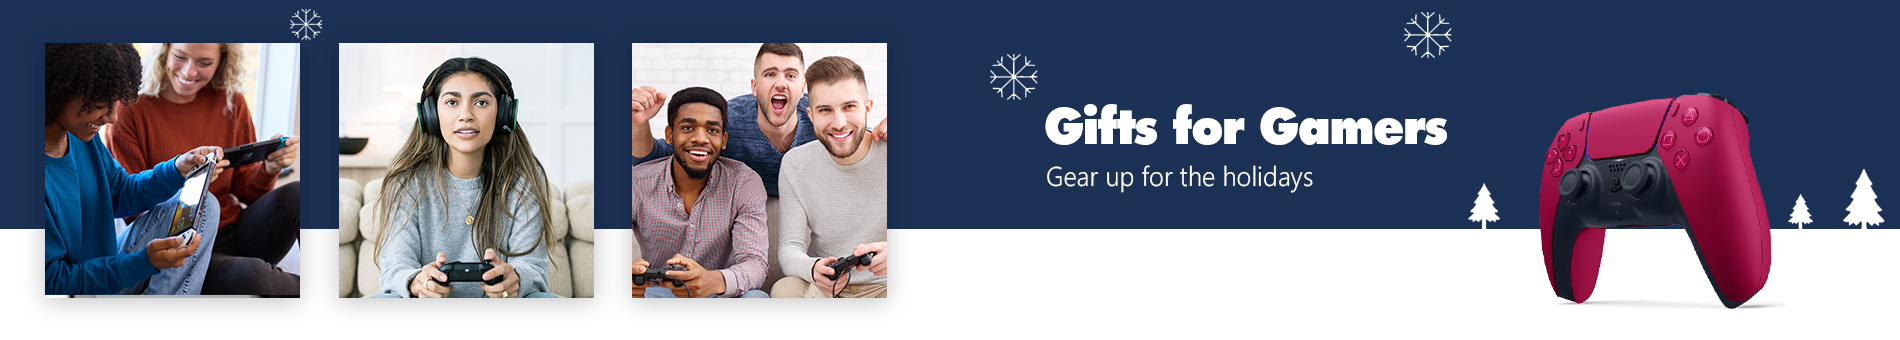 Ant Giftsforgamers Banner 02